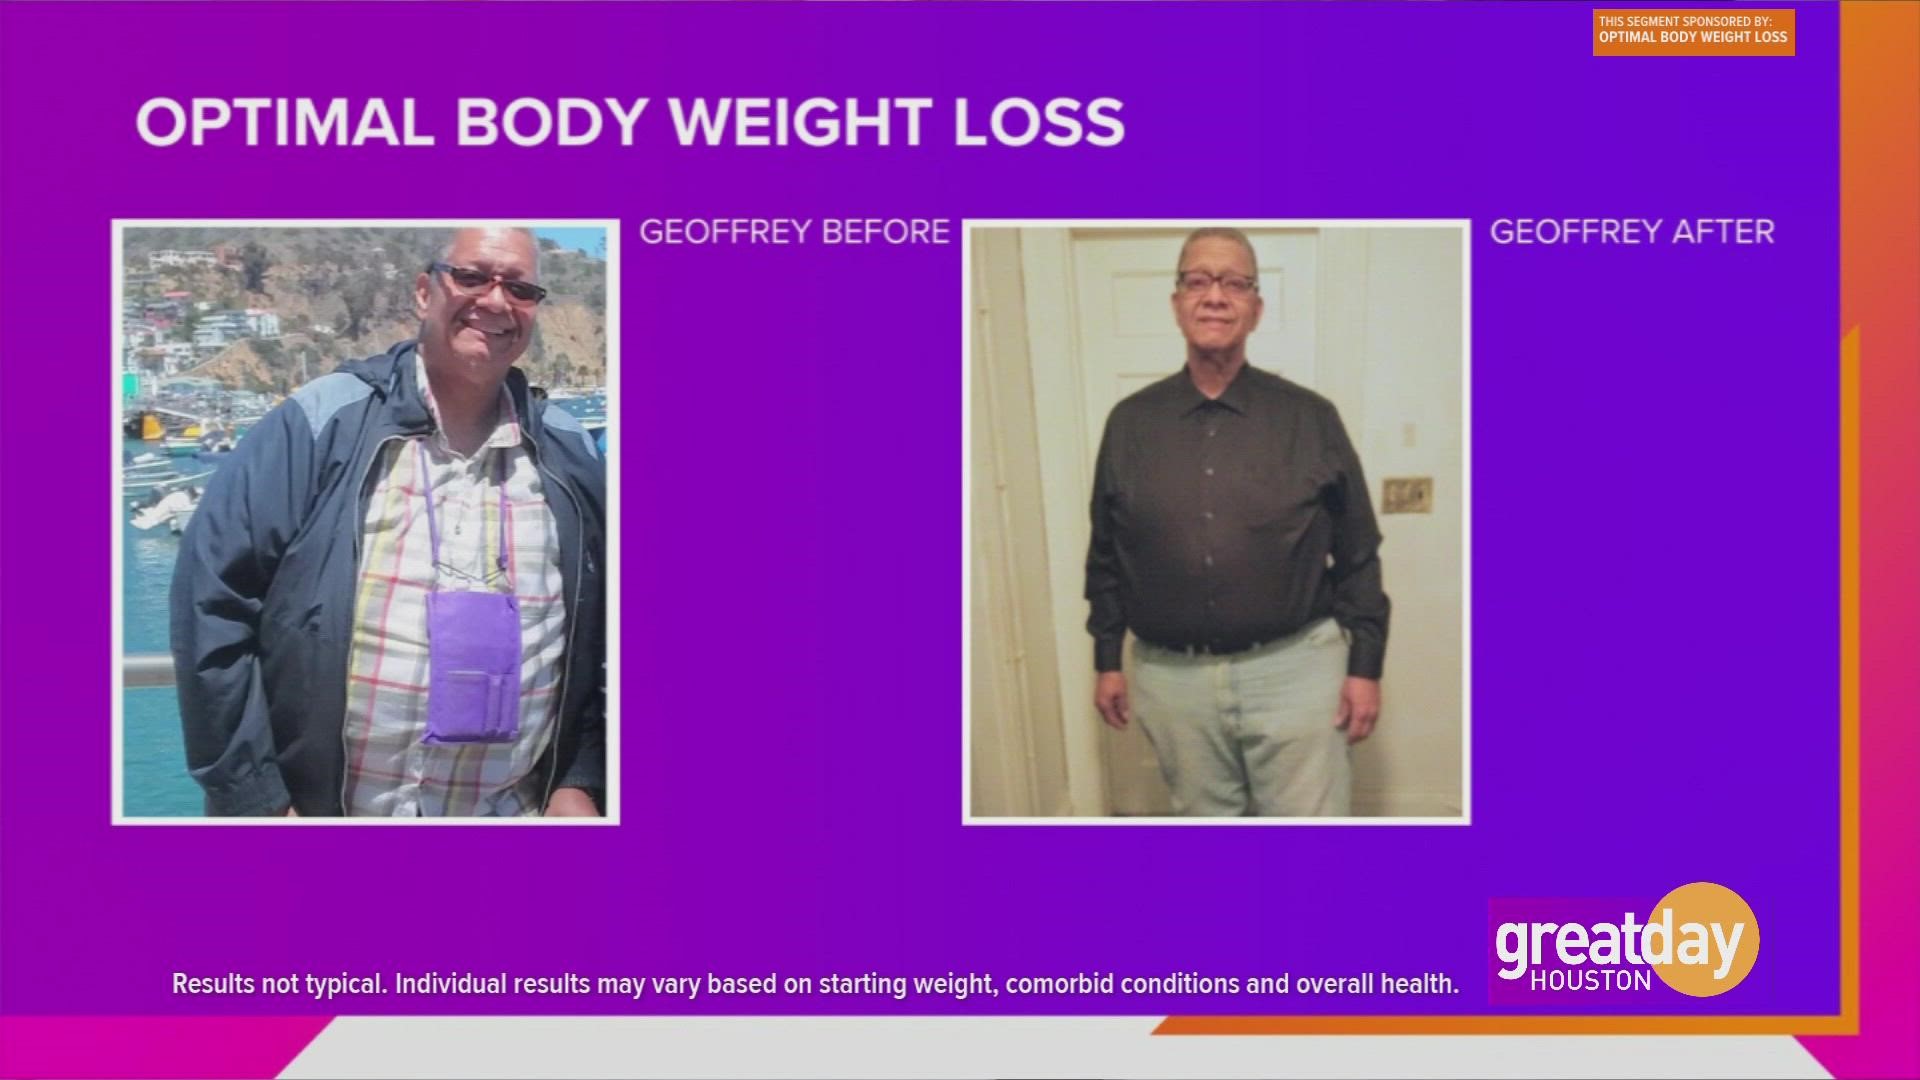 Optimal Body Weight Loss customizes programs specifically for your individual needs